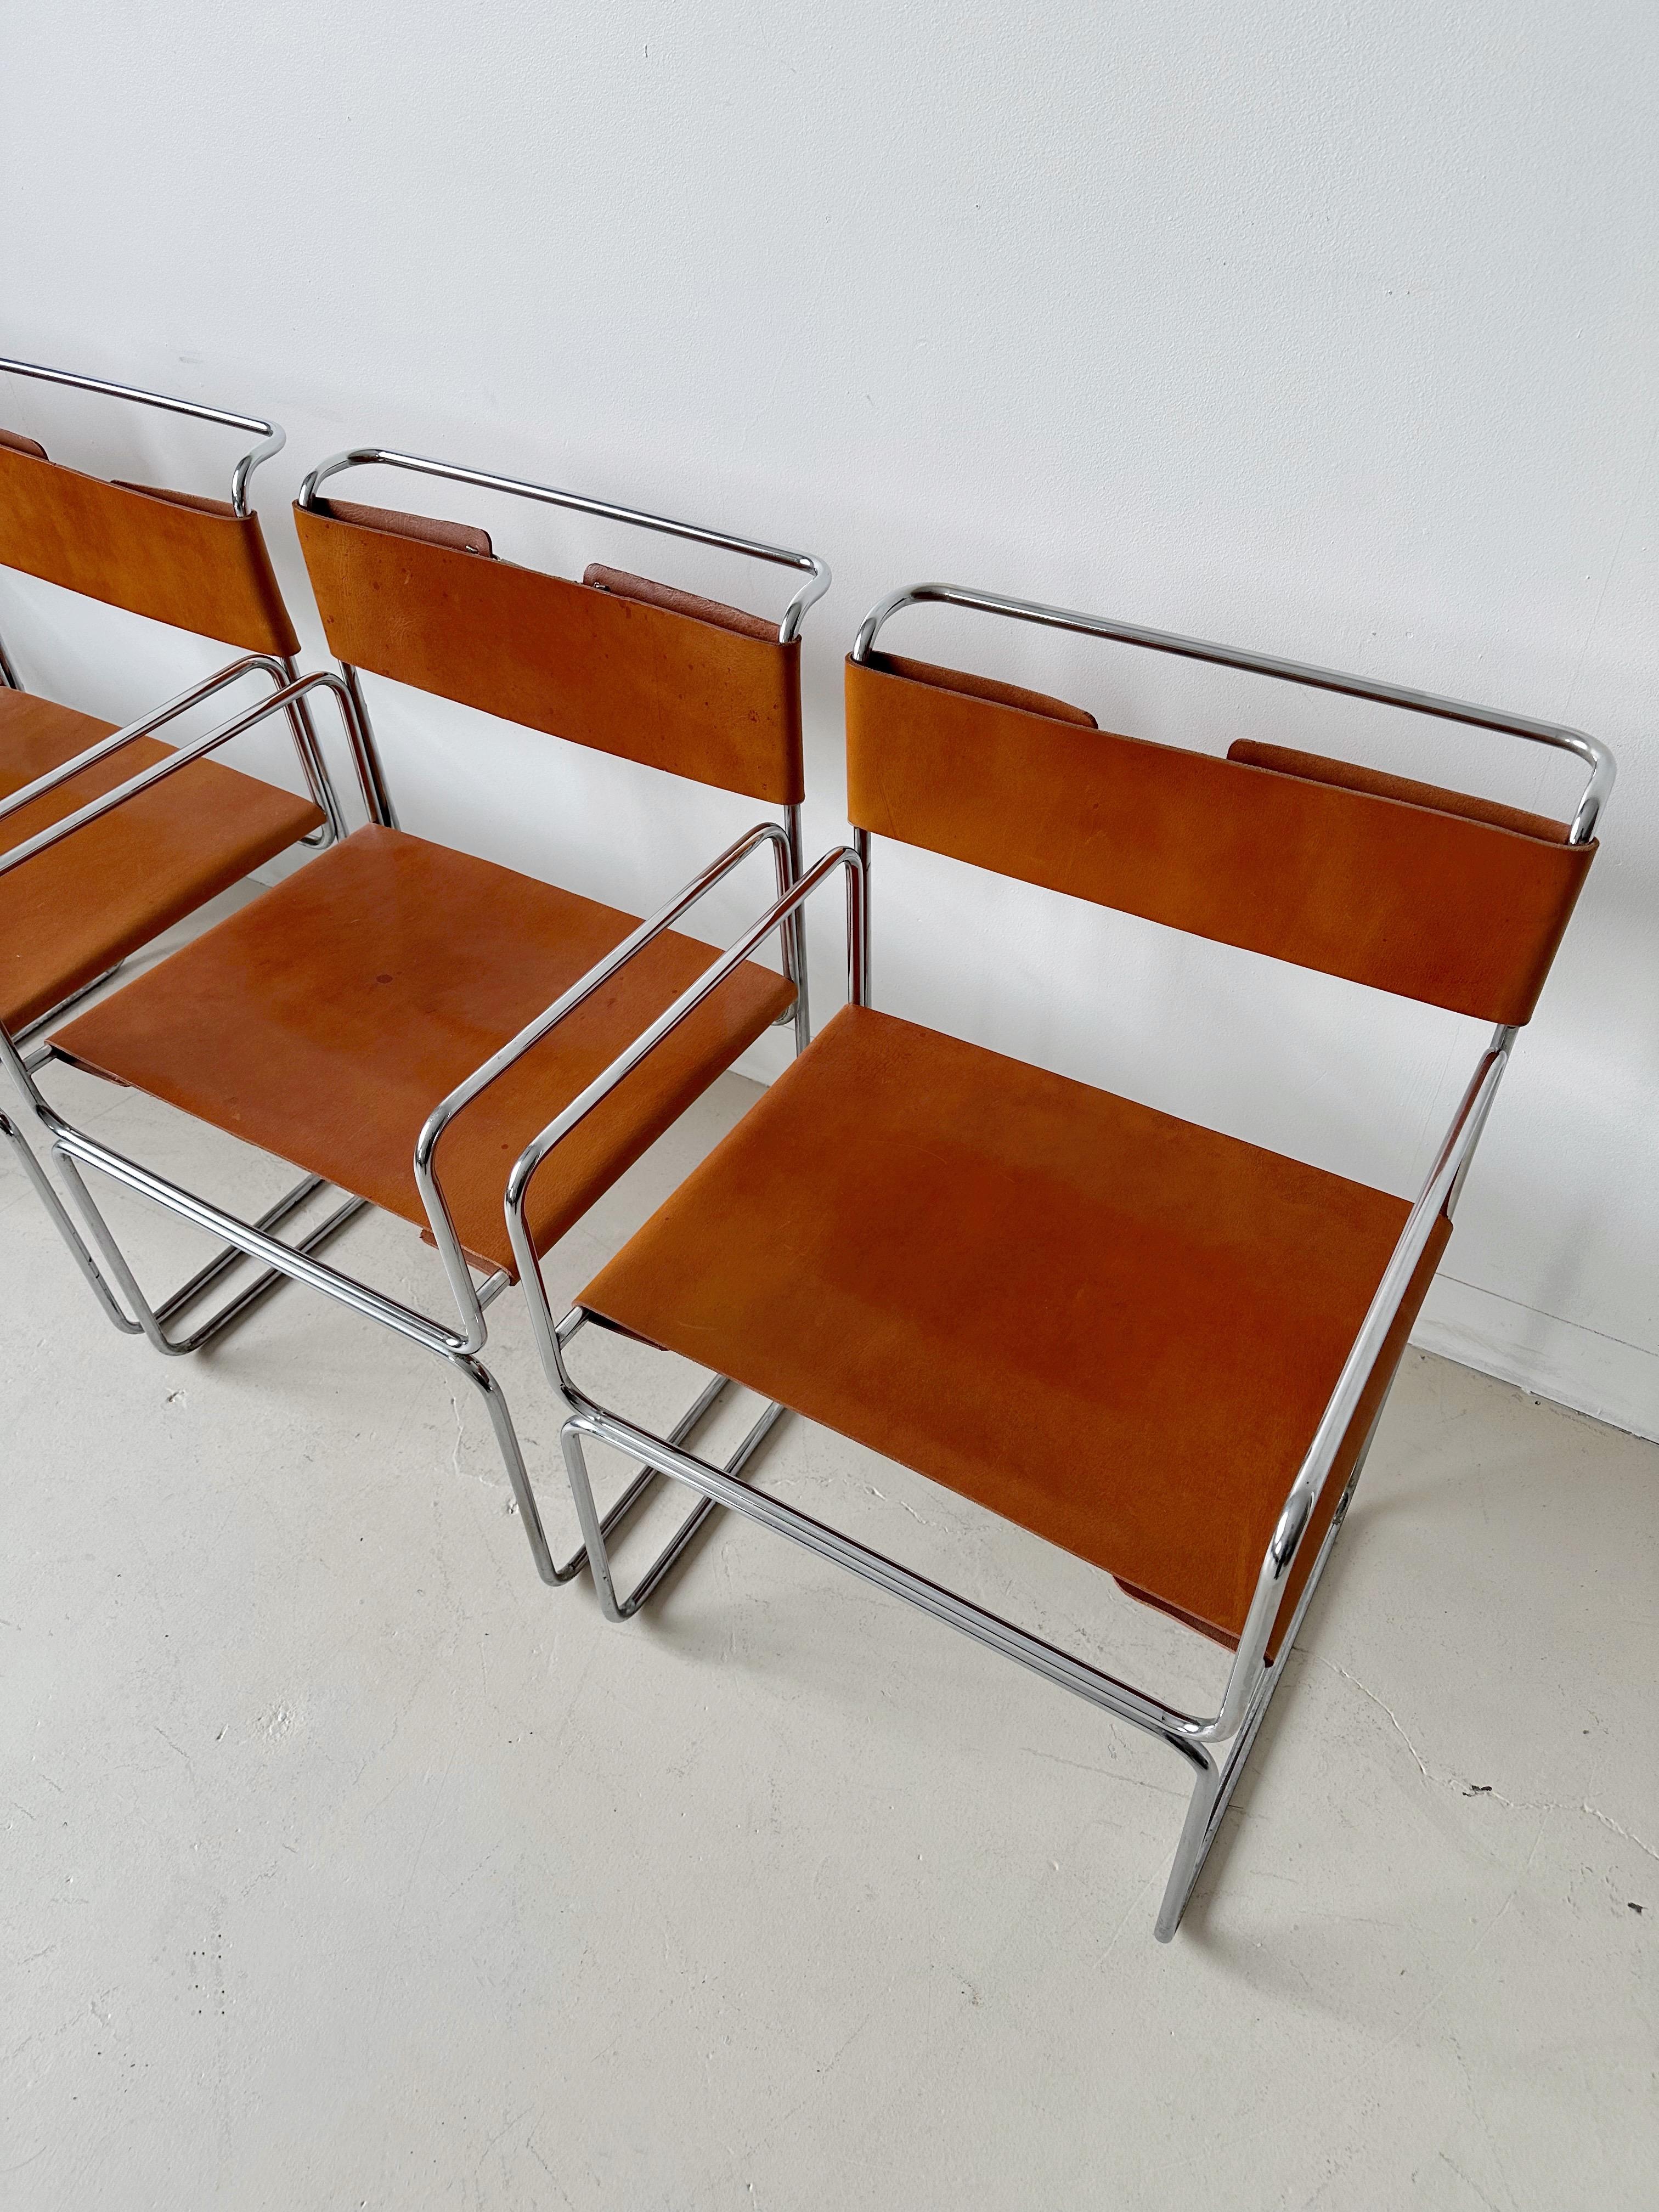 Steel Tan Leather Libellula Chairs by Giovanni Carini for Planula, 70's For Sale